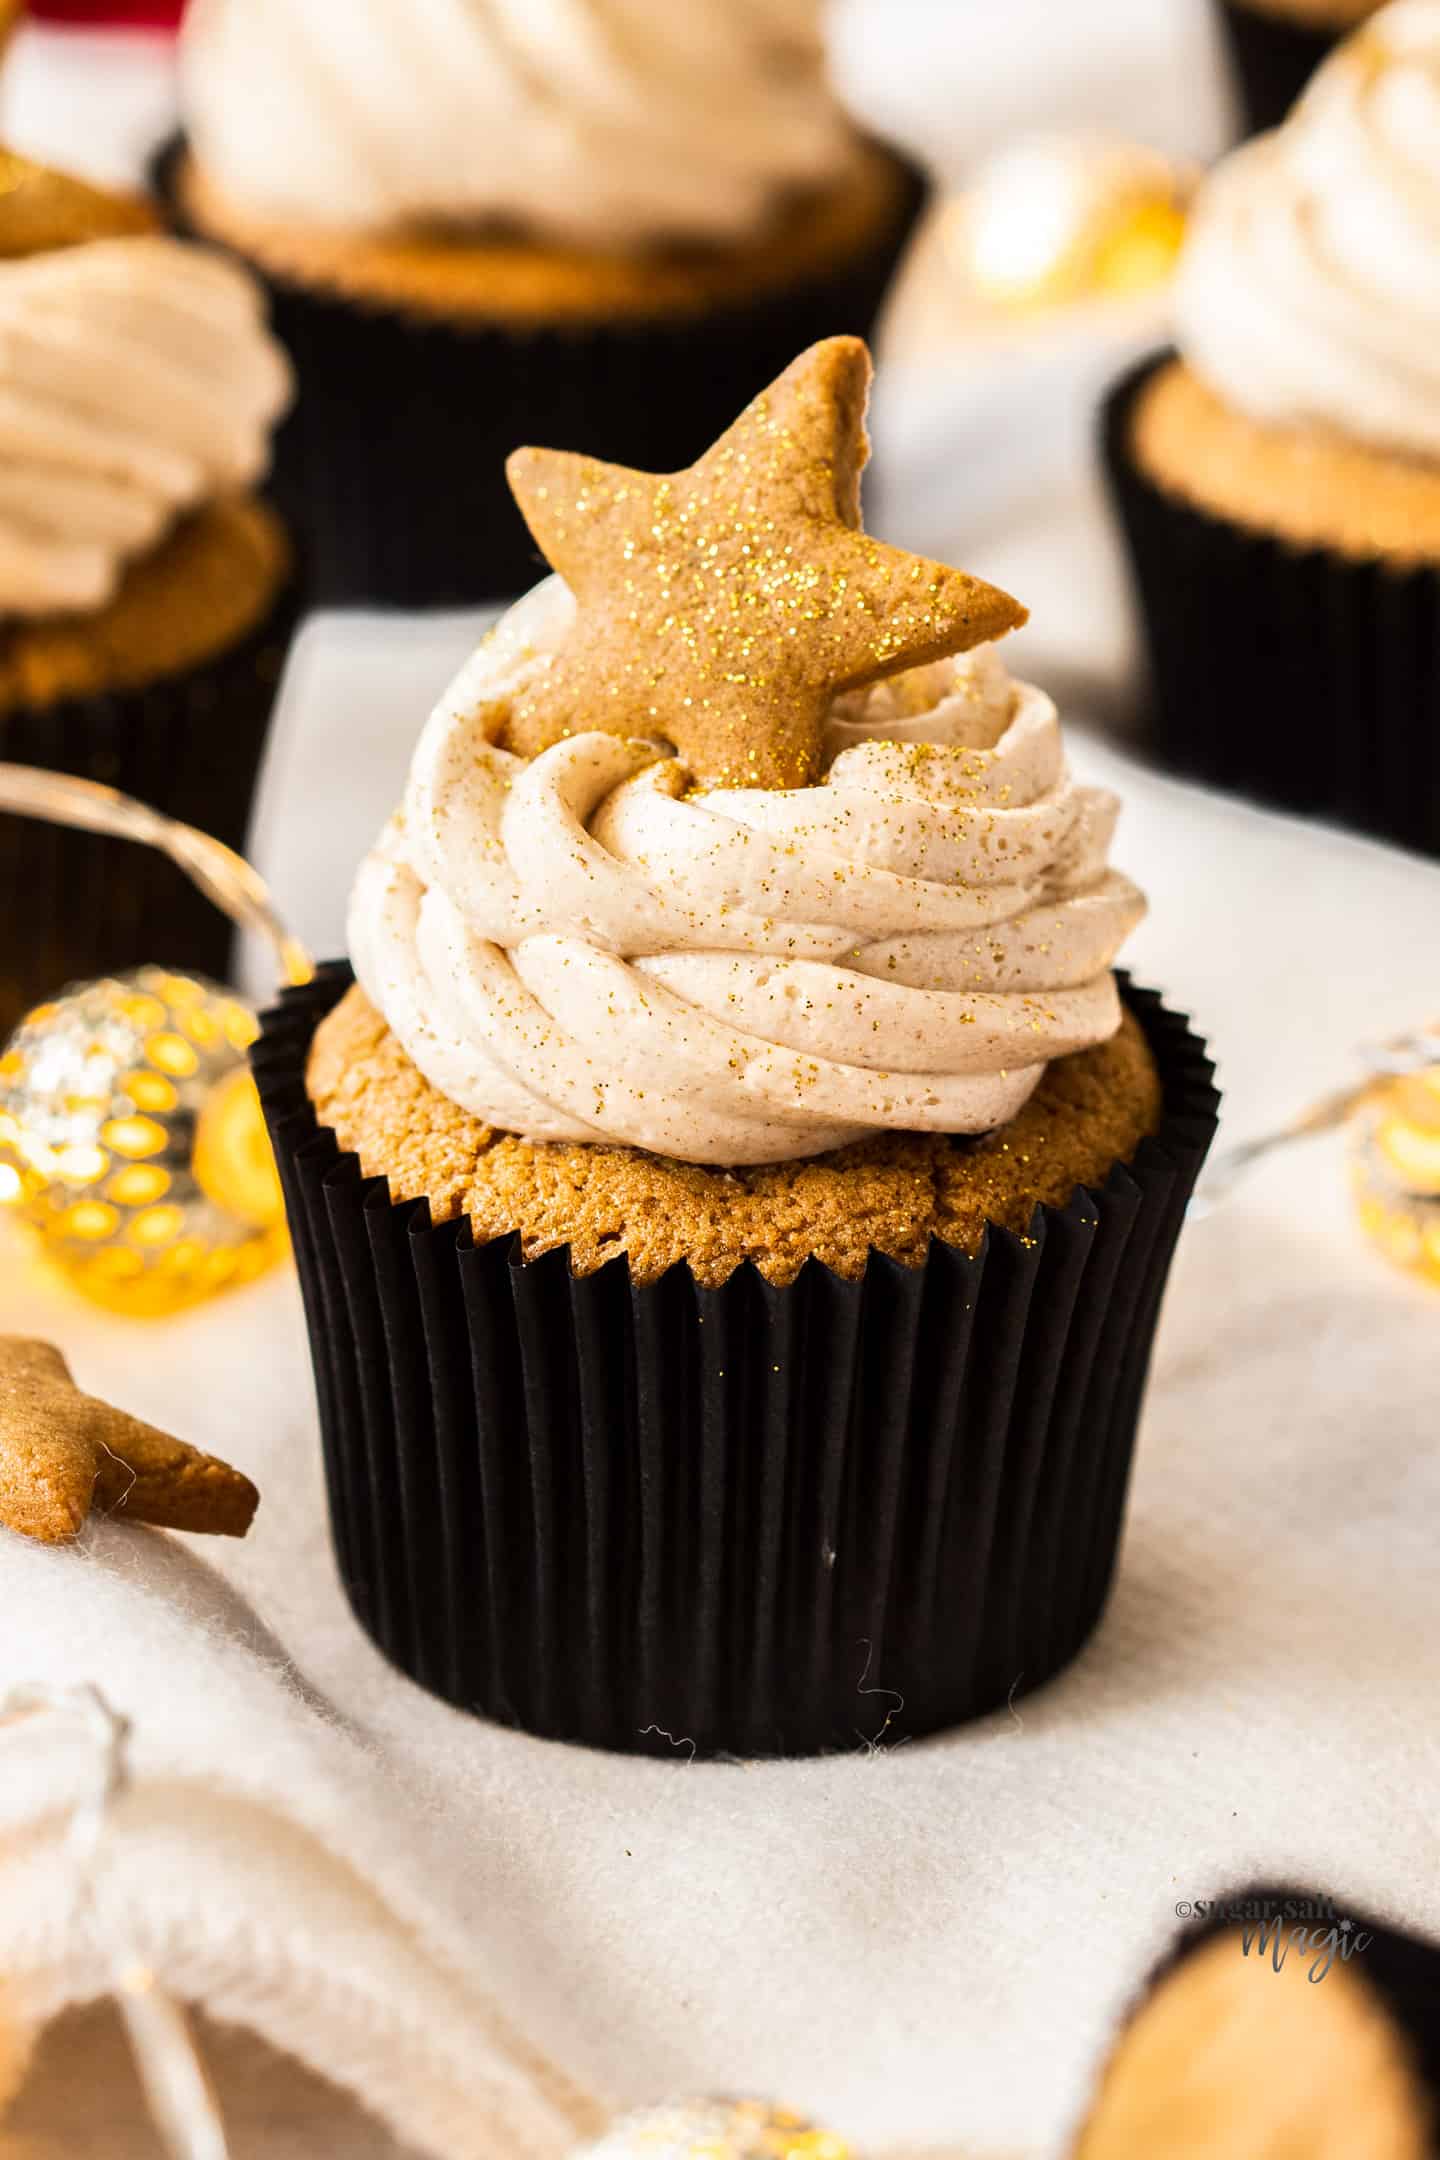 A gingerbread cupcake with a star shaped gingerbread cookie on top.